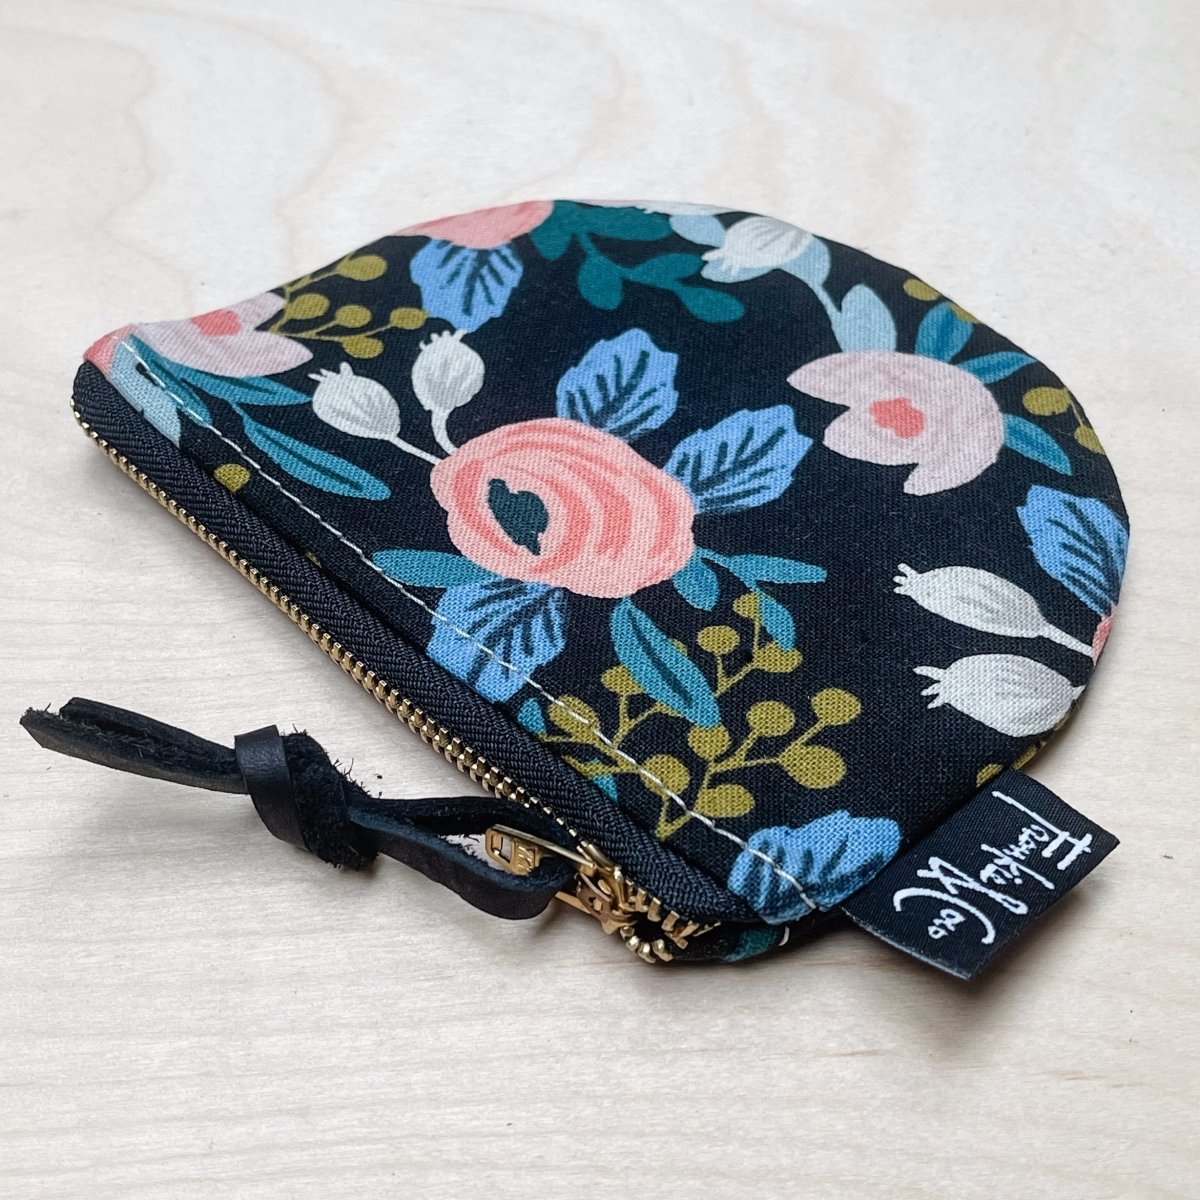 A black canvas half moon shaped pouch with a black and floral pattern and zipper pull. The Richmond Half Moon Pouch in Dark Roses is designed and handmade by Frankie & Coco in Portland, OR.